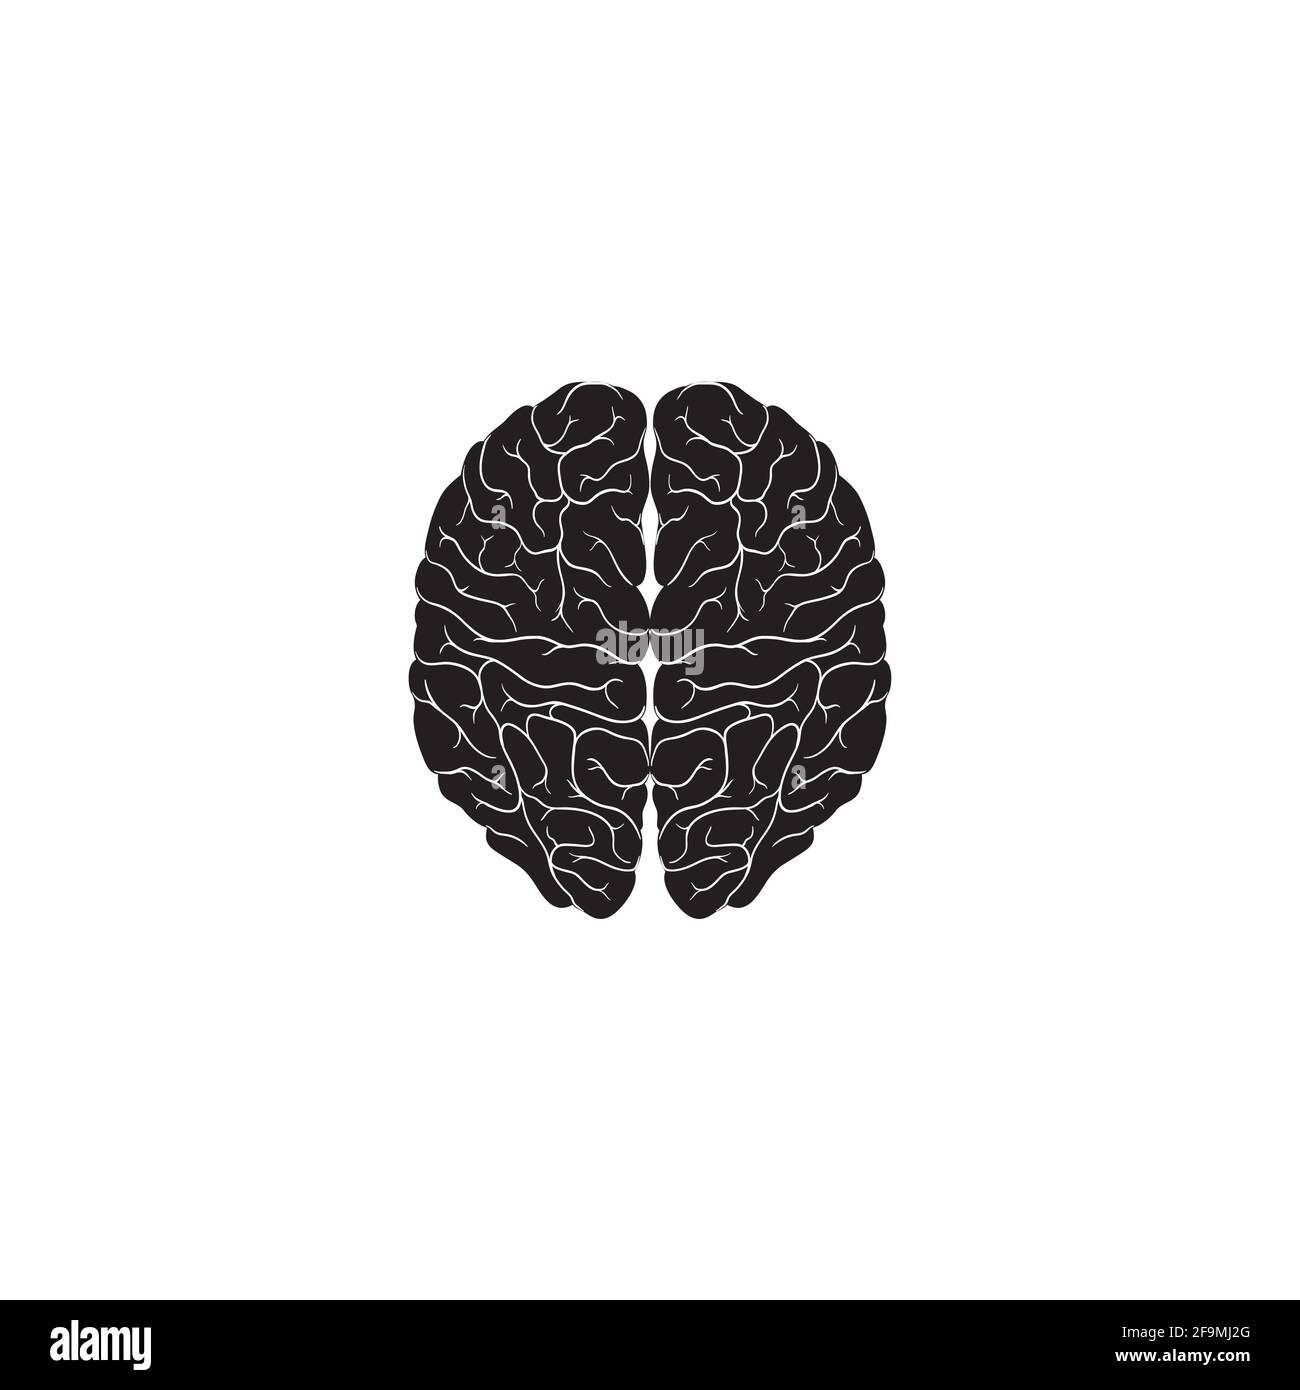 Modern Black Human Brain Icon Vector illustration. Simple brain of human icon. Top View Brain Symbol isolated on white background Stock Vector